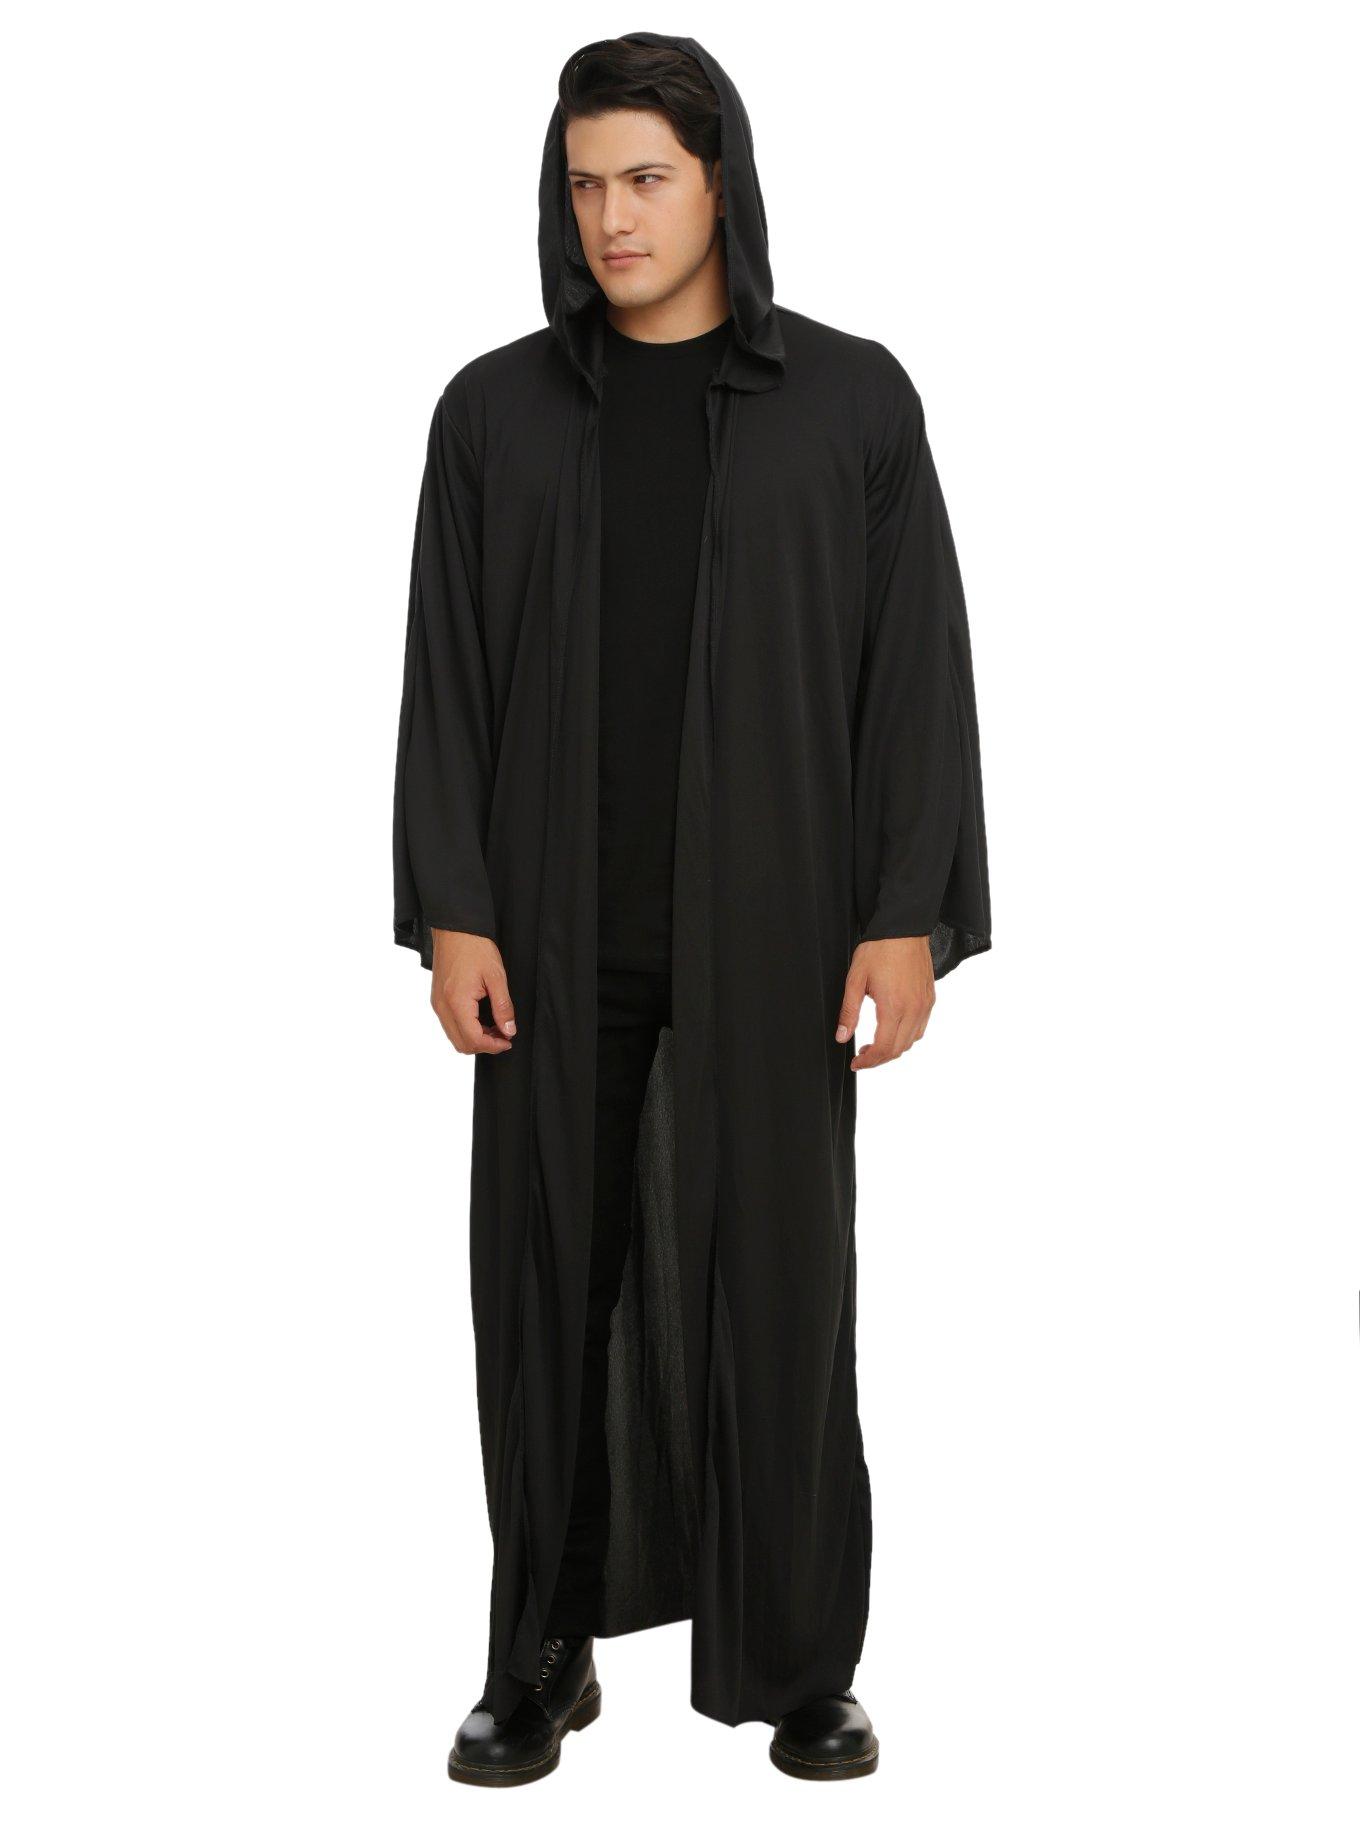 SW SITH ROBE | Hot Topic